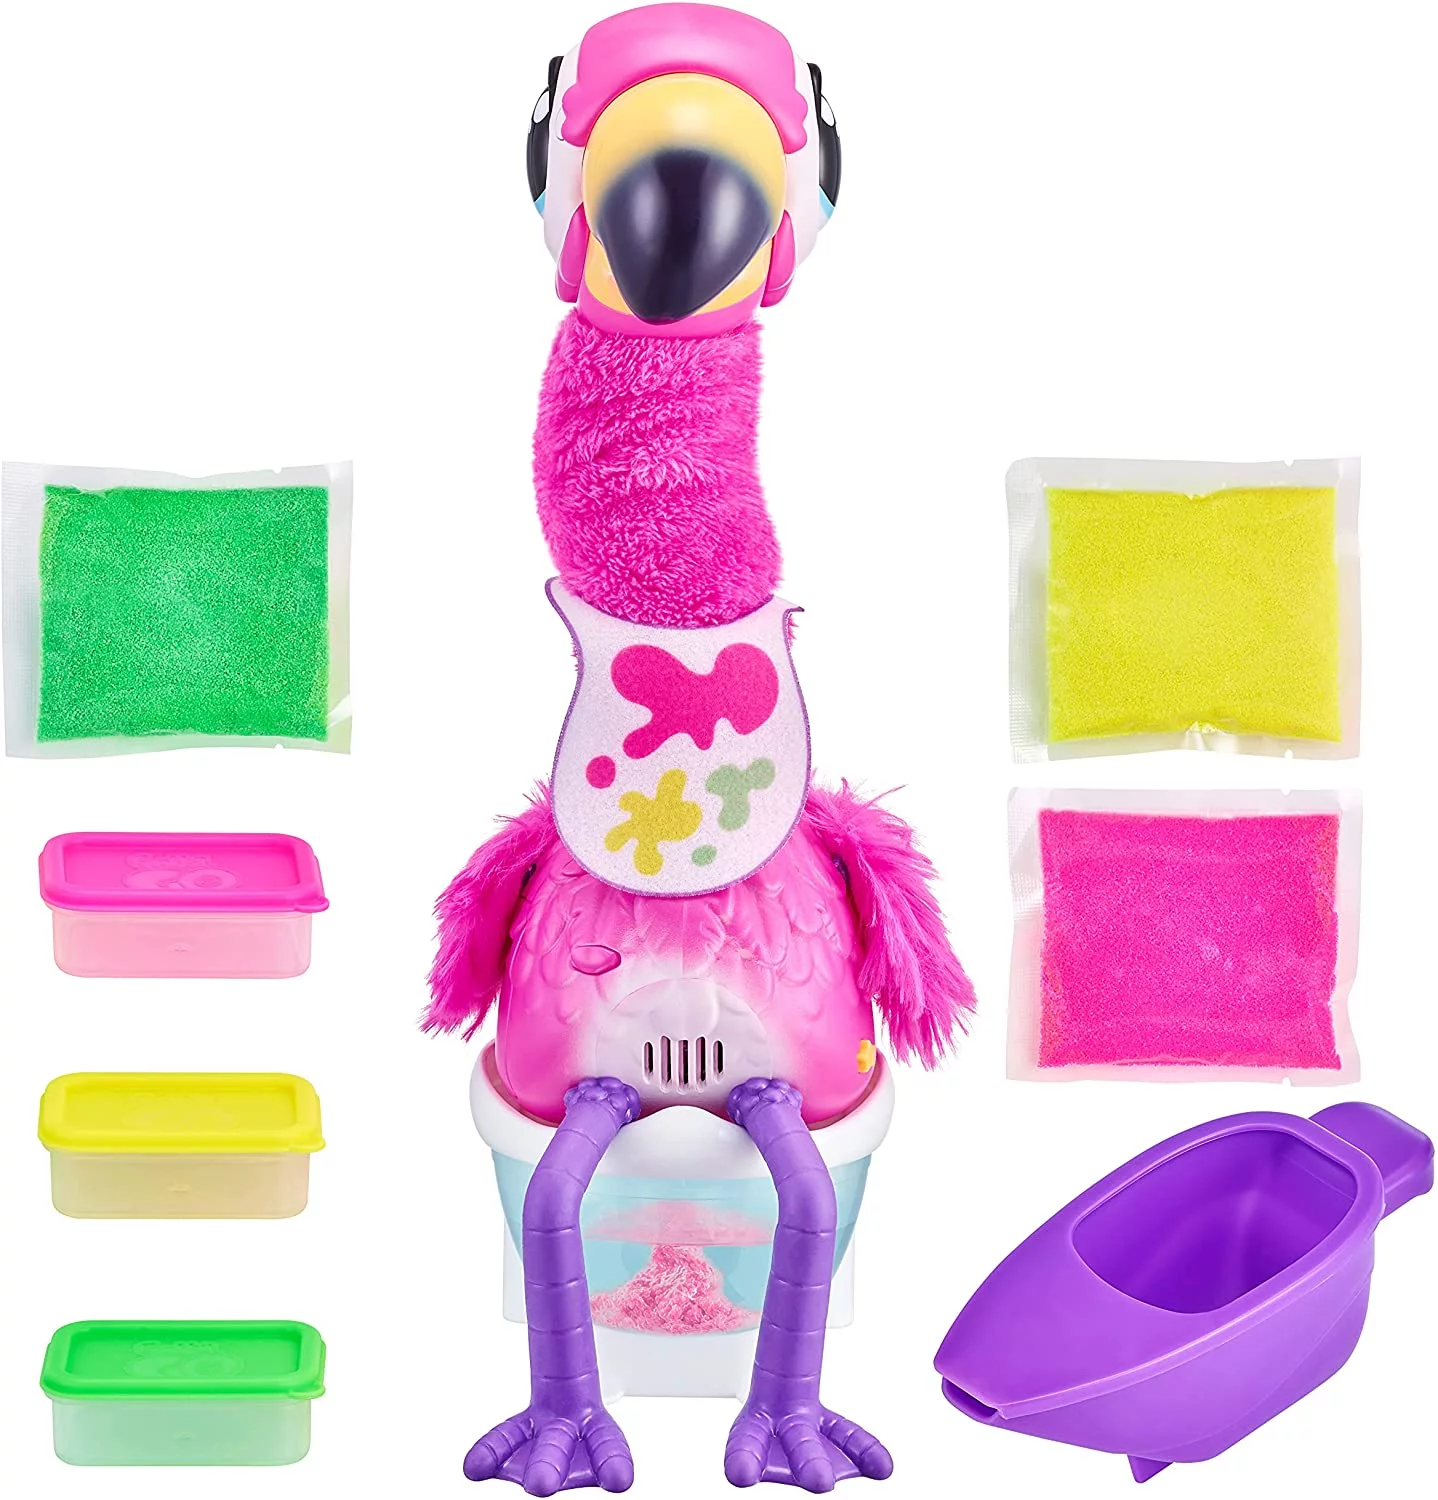 Little Live Pets Gotta Go Flamingo  Interactive Plush Toy That Eats, Sings, Wiggles, Poops and Talks Batteries Included  Reusable Food. Ages 4+